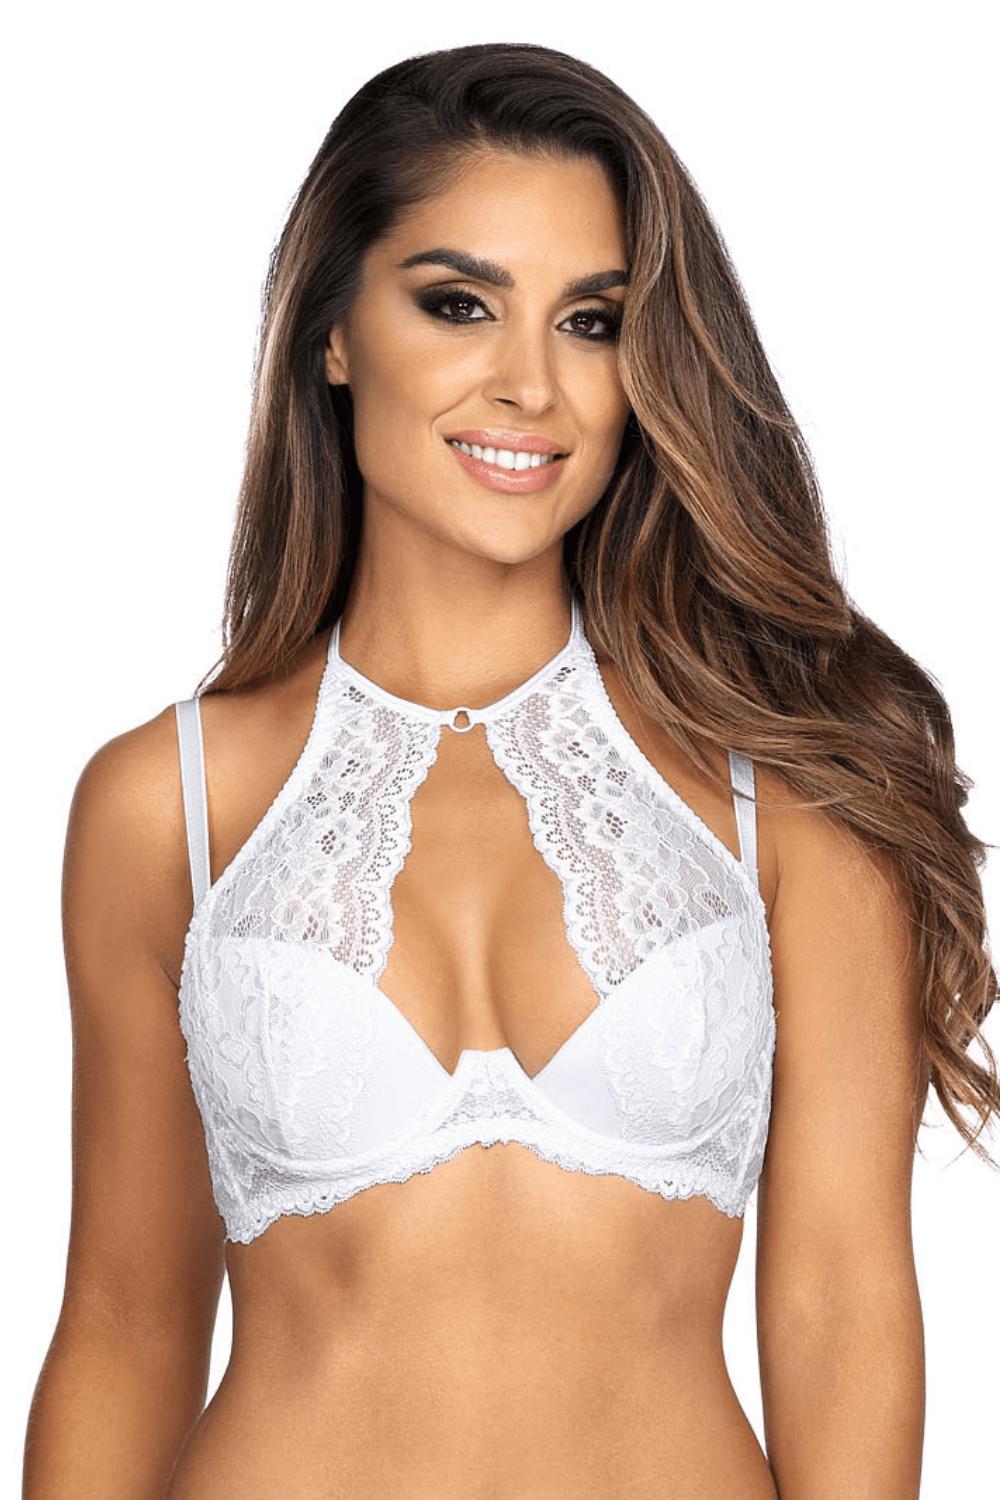 Axami Summer Bride High Neck Lace Push-up Bra - Limited Edition